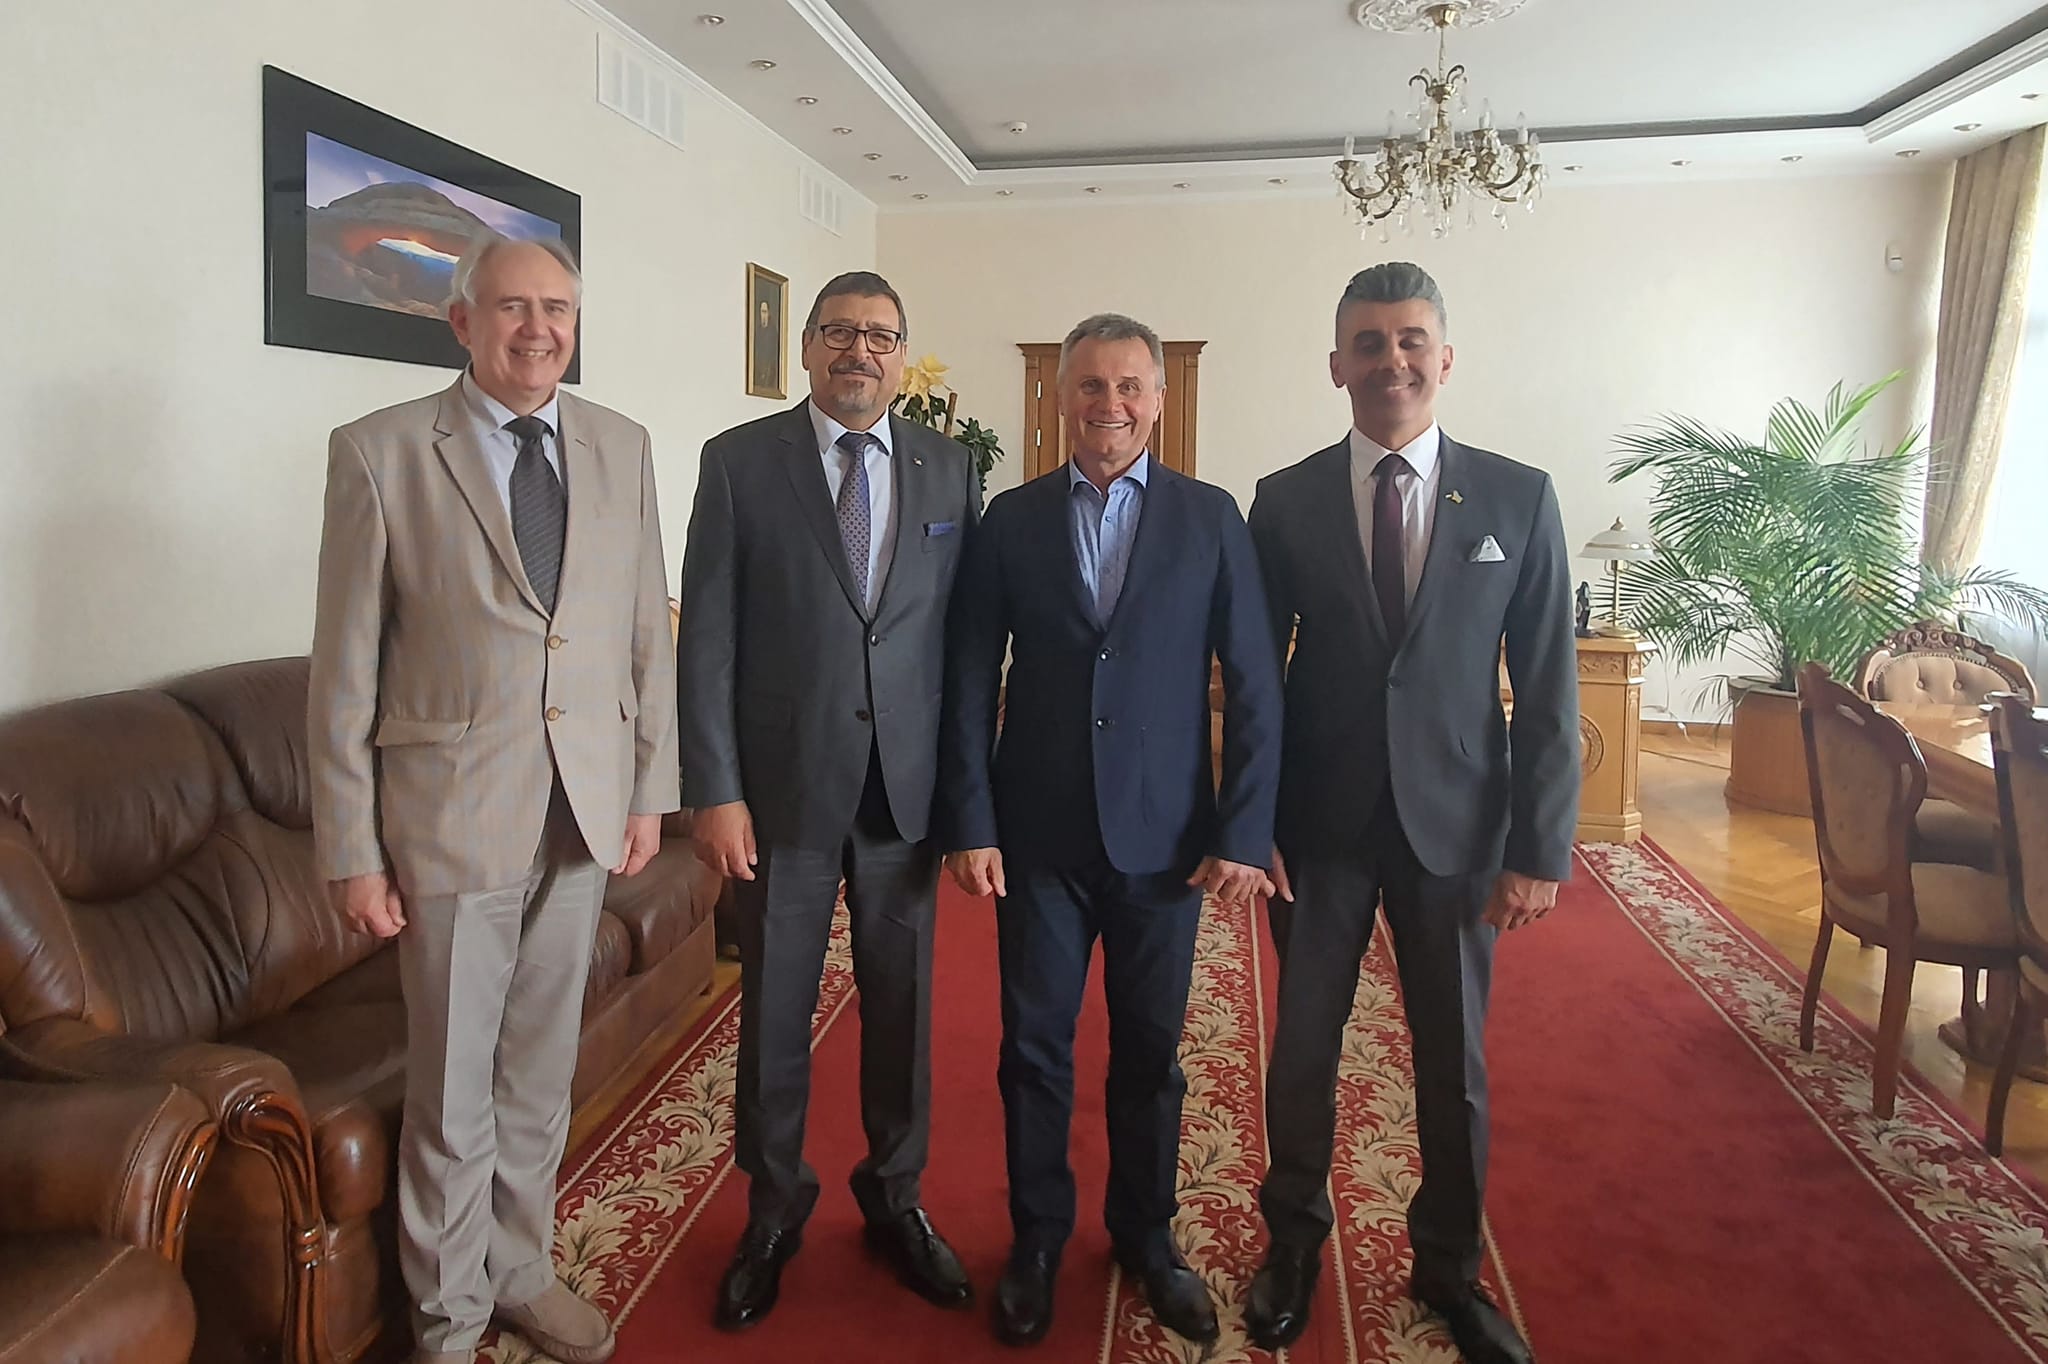 Ambassador of Palestine to Ukraine Mr. Hashem Dajani and Counselor of the Embassy Mr. Dawood Jalloud attended the Graduation Ceremony of the Institute of International Relations of Taras Shevchenko National University of Kyiv